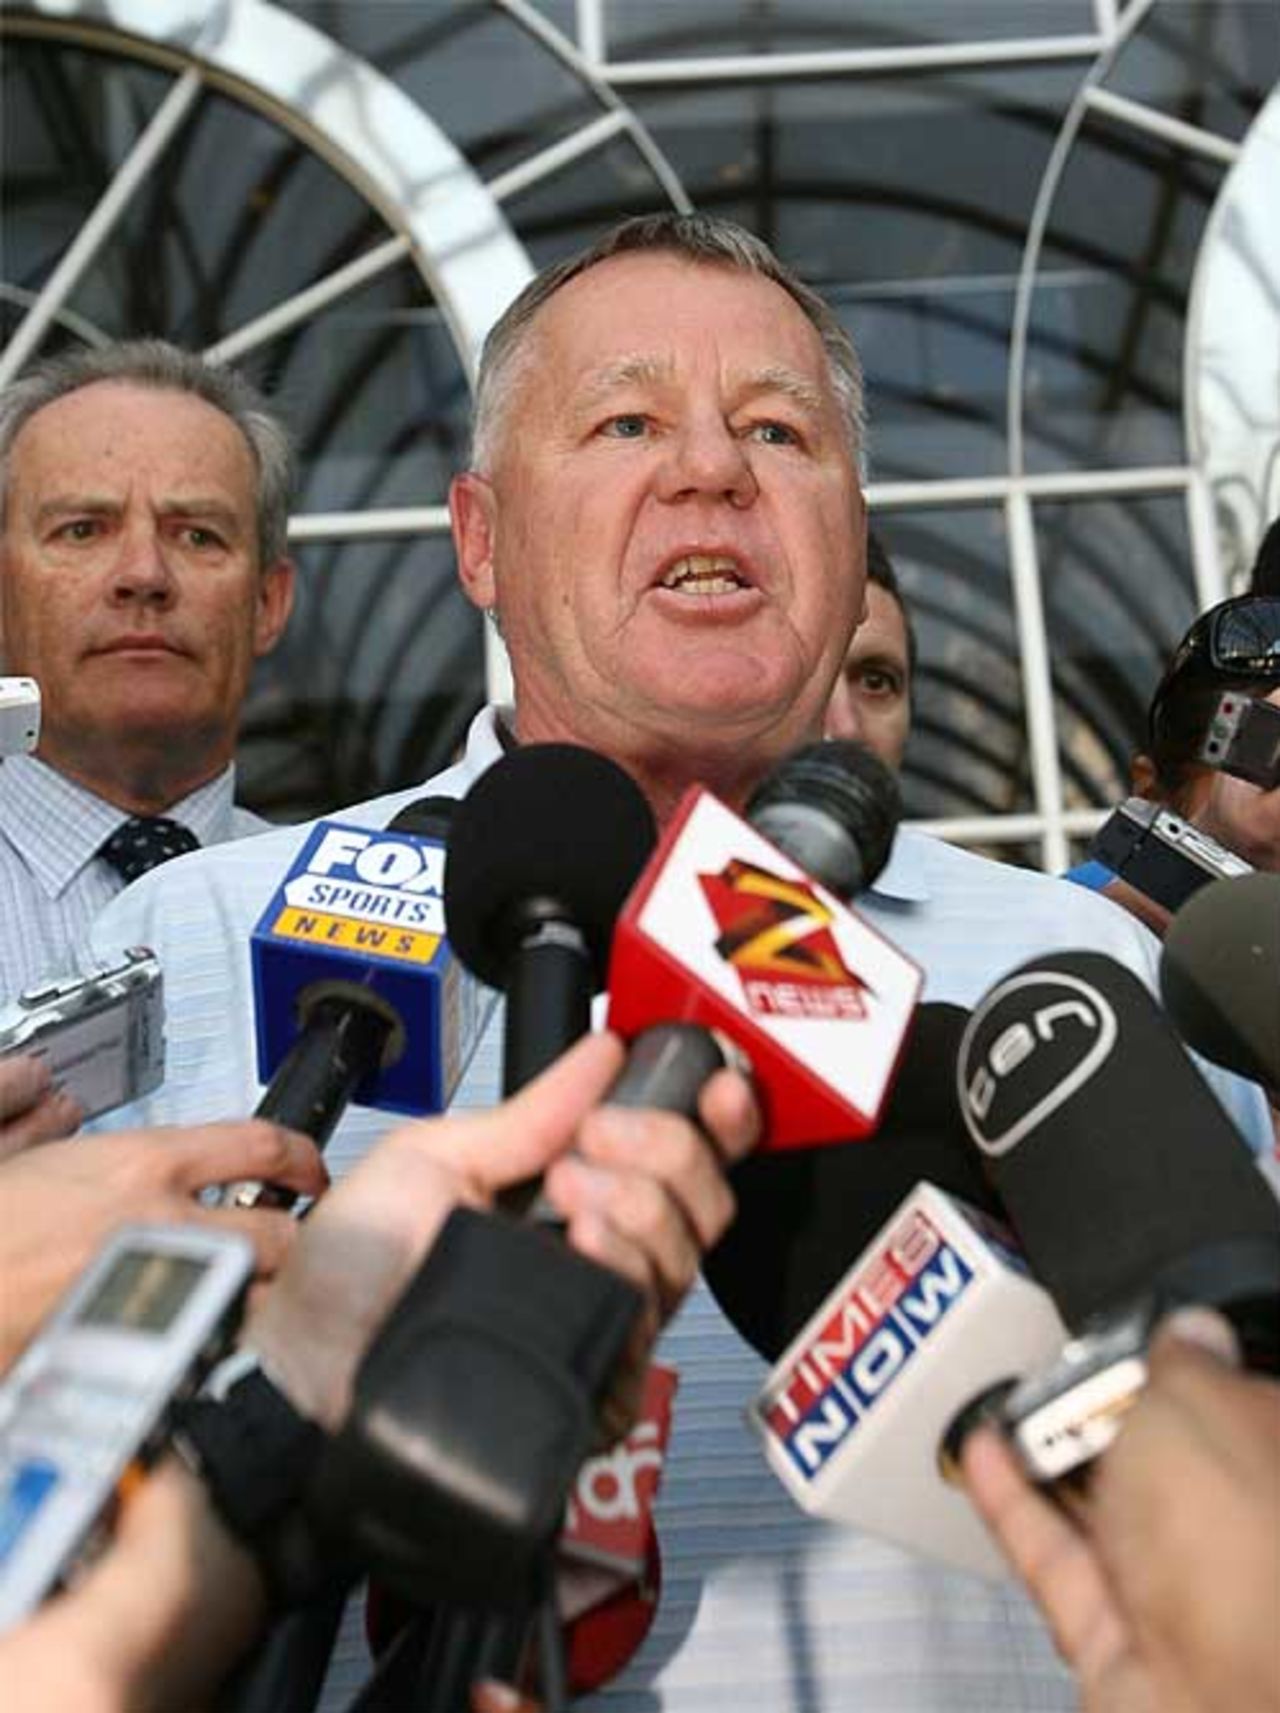 Mike Procter gives the media an update after Brad Hogg's charges were dropped, Perth, January 14, 2008